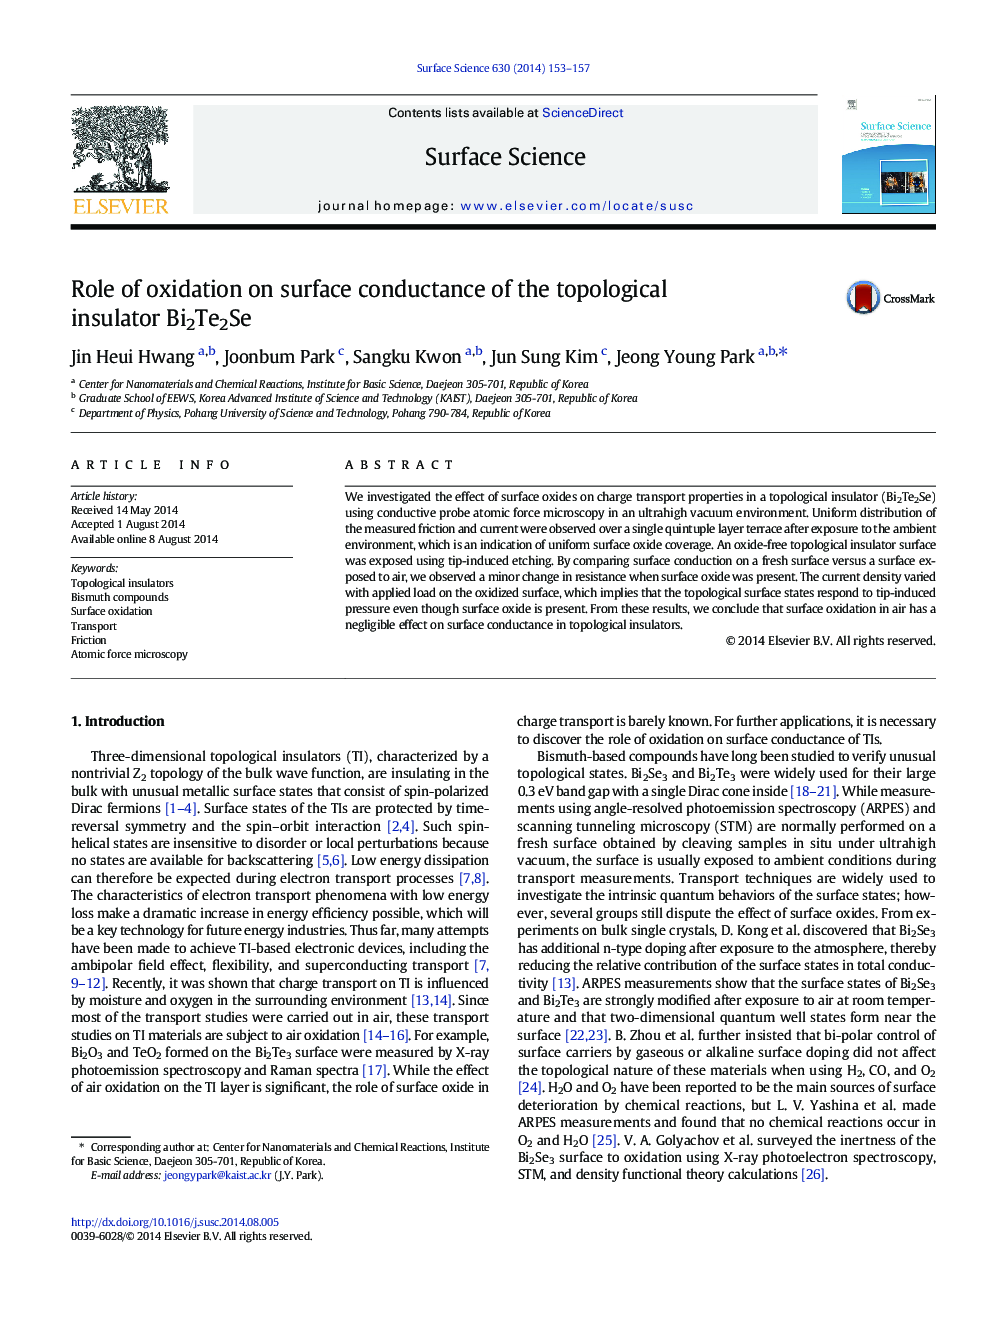 Role of oxidation on surface conductance of the topological insulator Bi2Te2Se